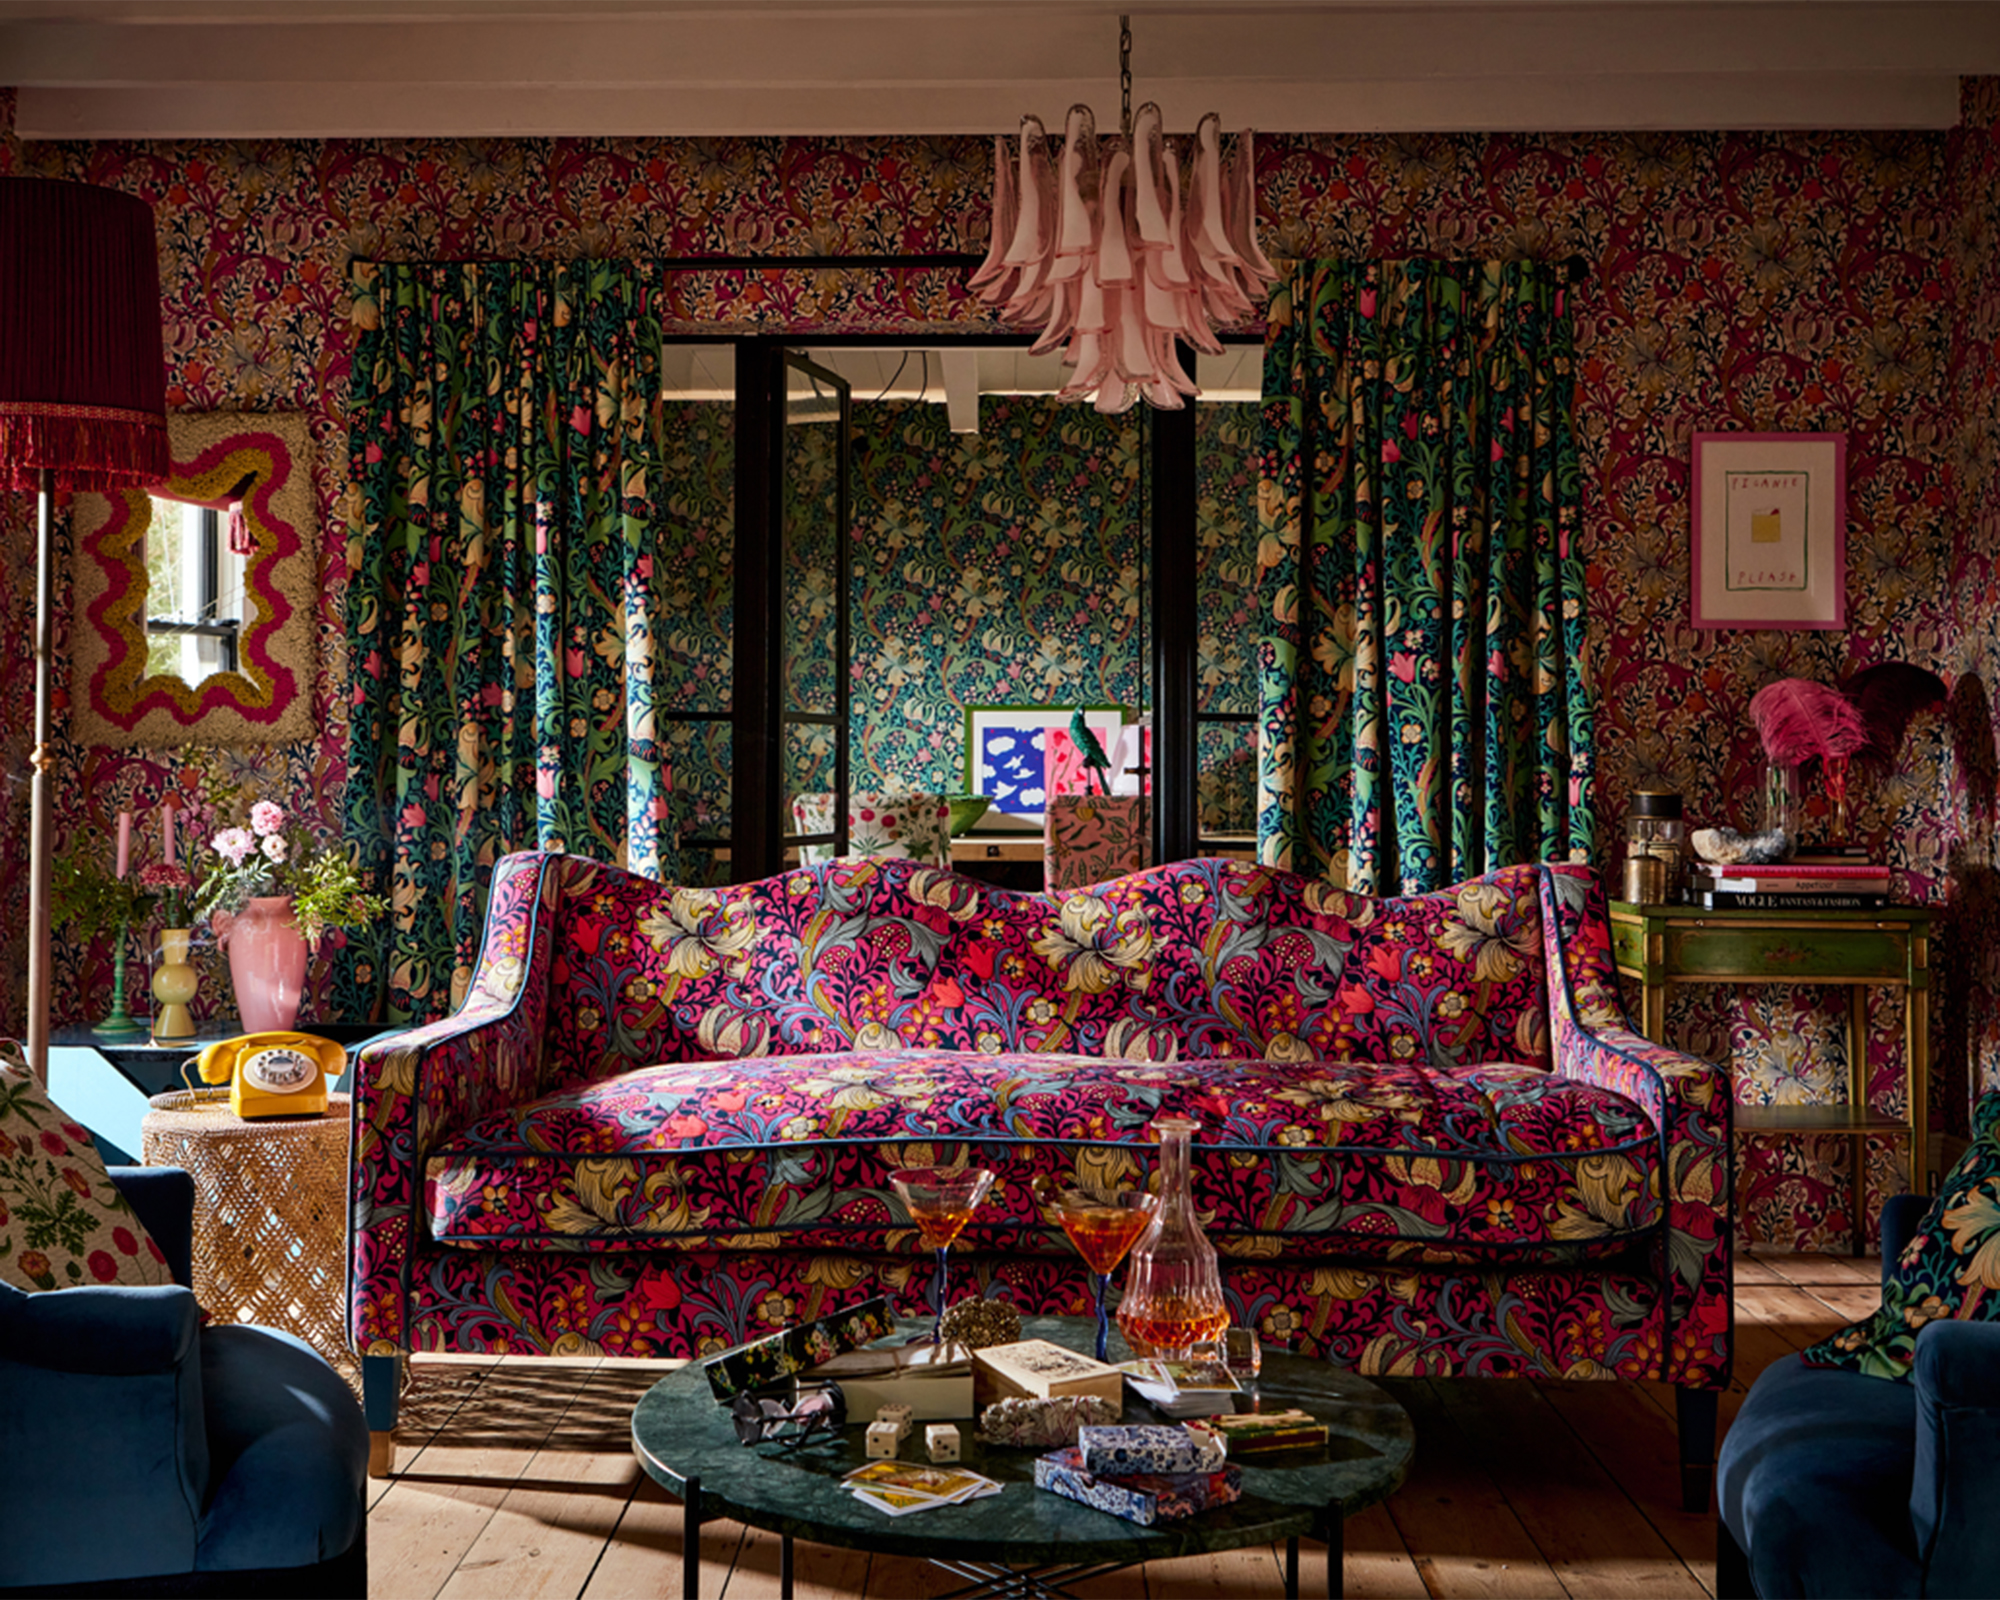 A modern maximalist living room idea with floral furnishings including furniture and wallpaper wall covering decor